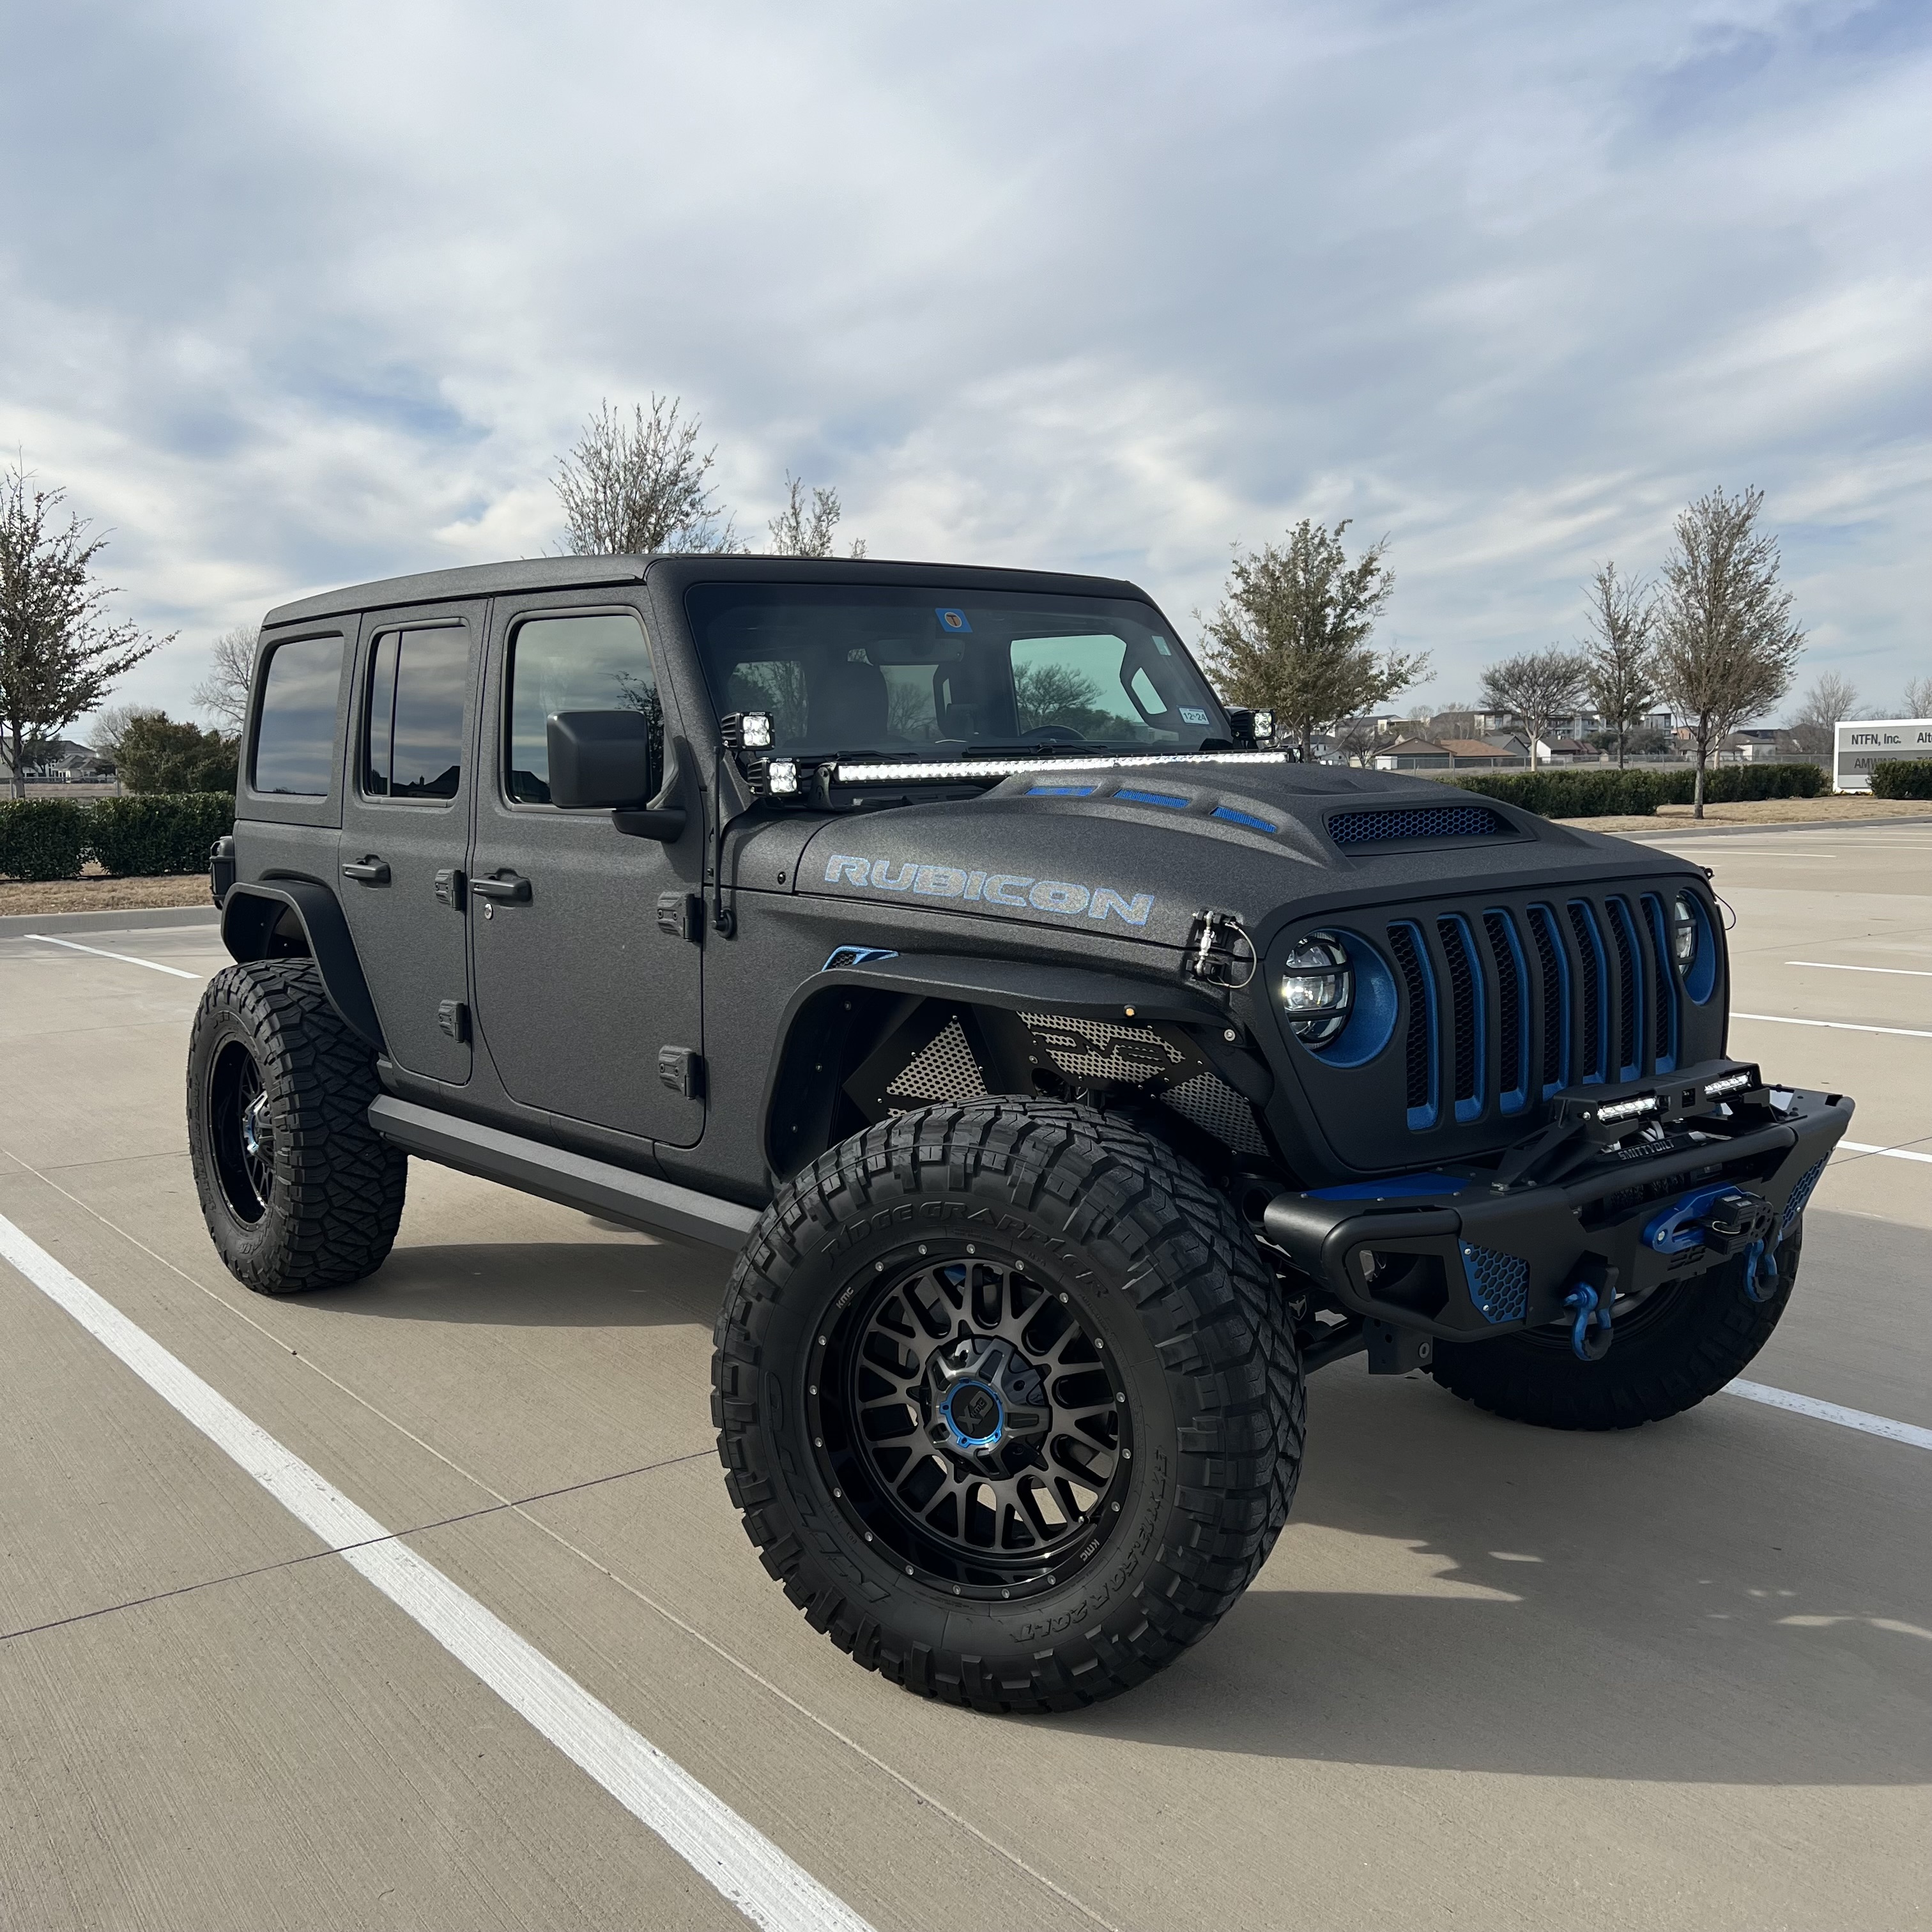 Used Jeep Wrangler for Sale - Autotrader